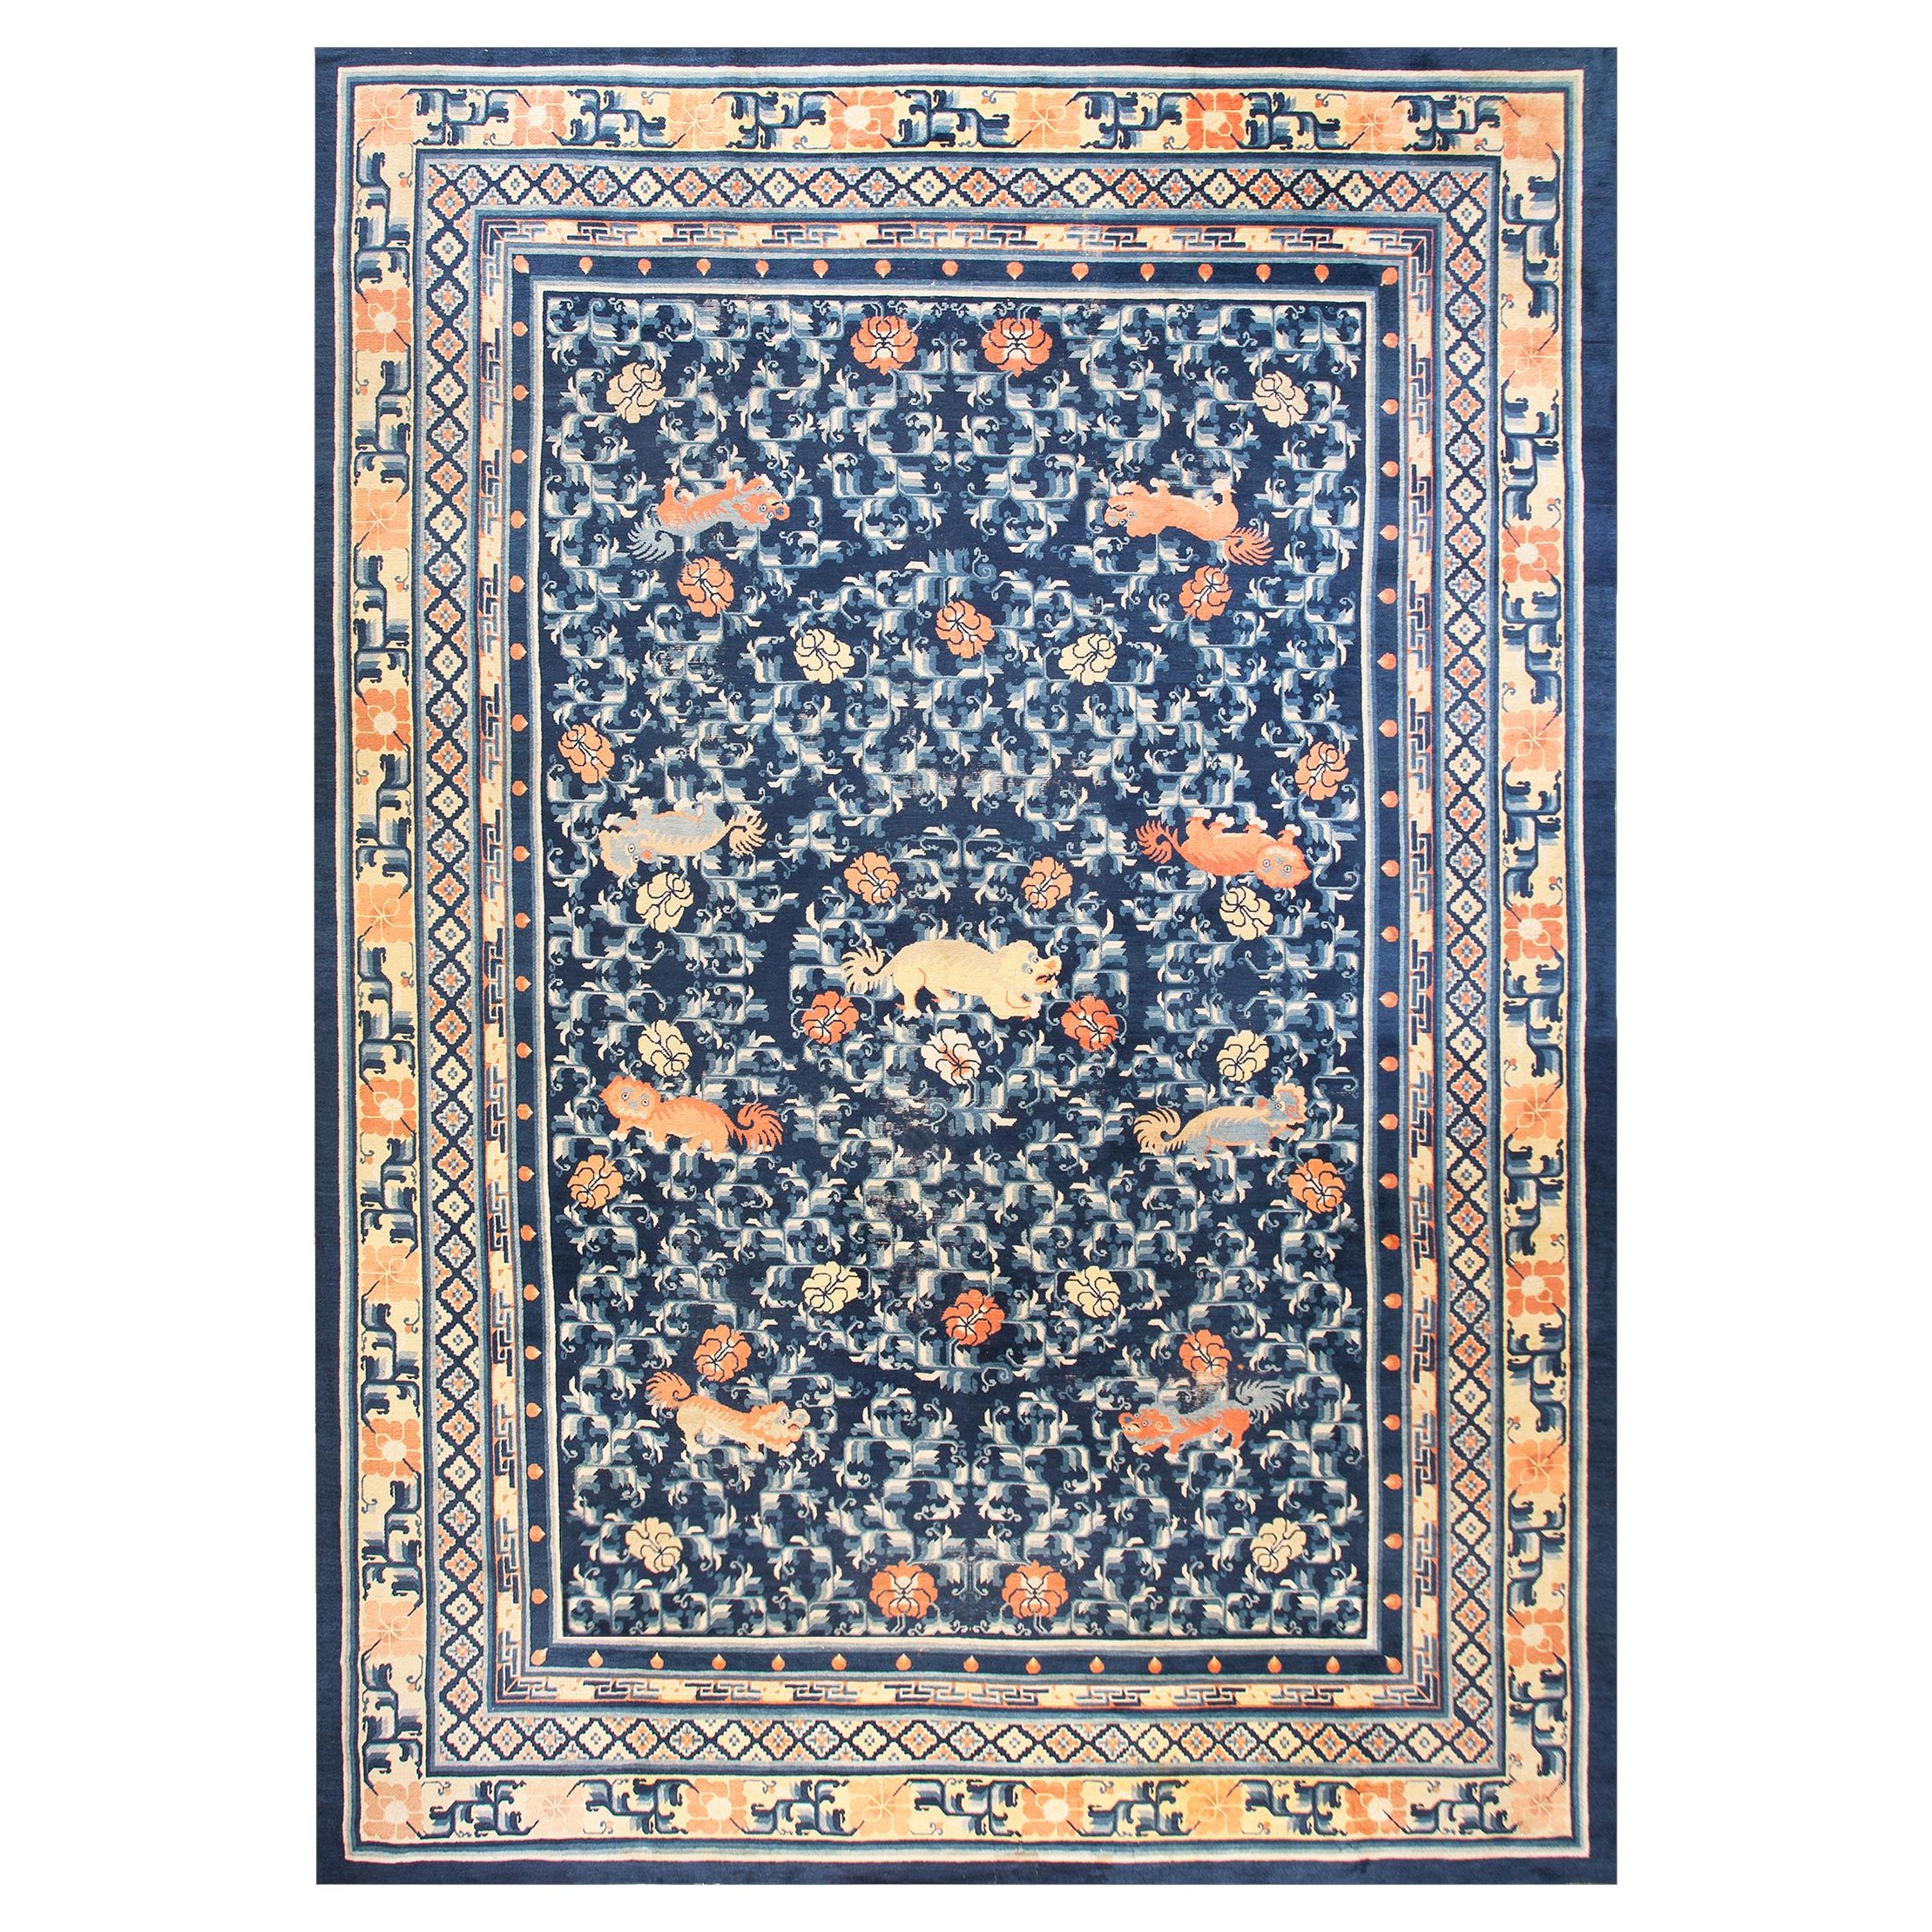 Mid 19th Century Chinese Ningxia Carpet ( 12' 6" x 18' 2" - 380 x 555) For Sale